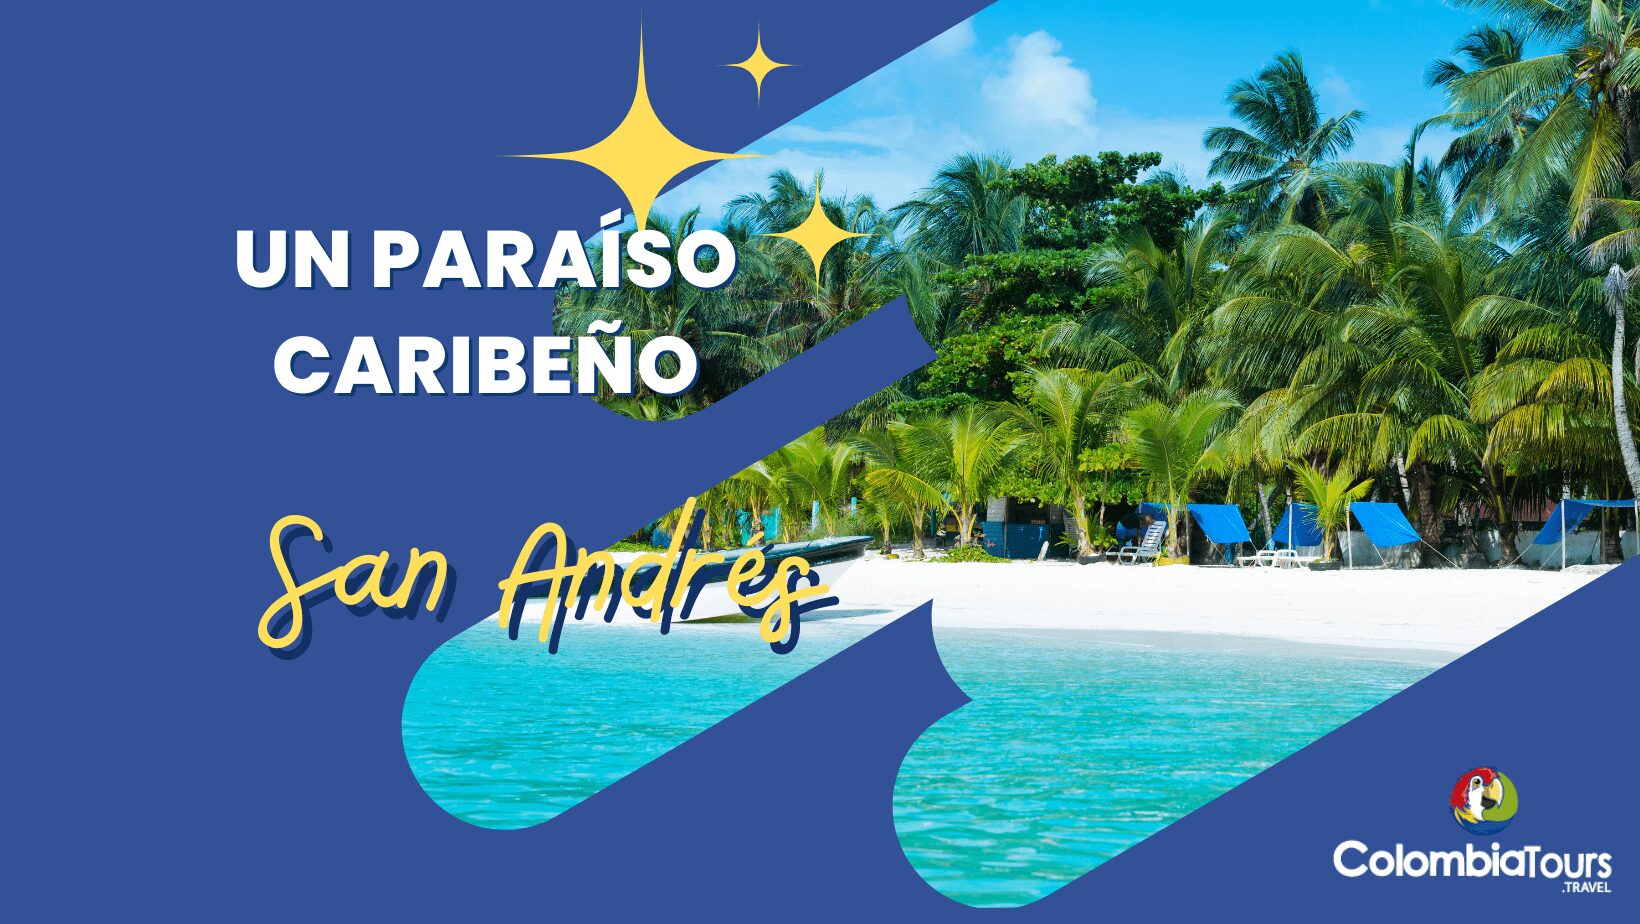 SAN ANDRES 21 1